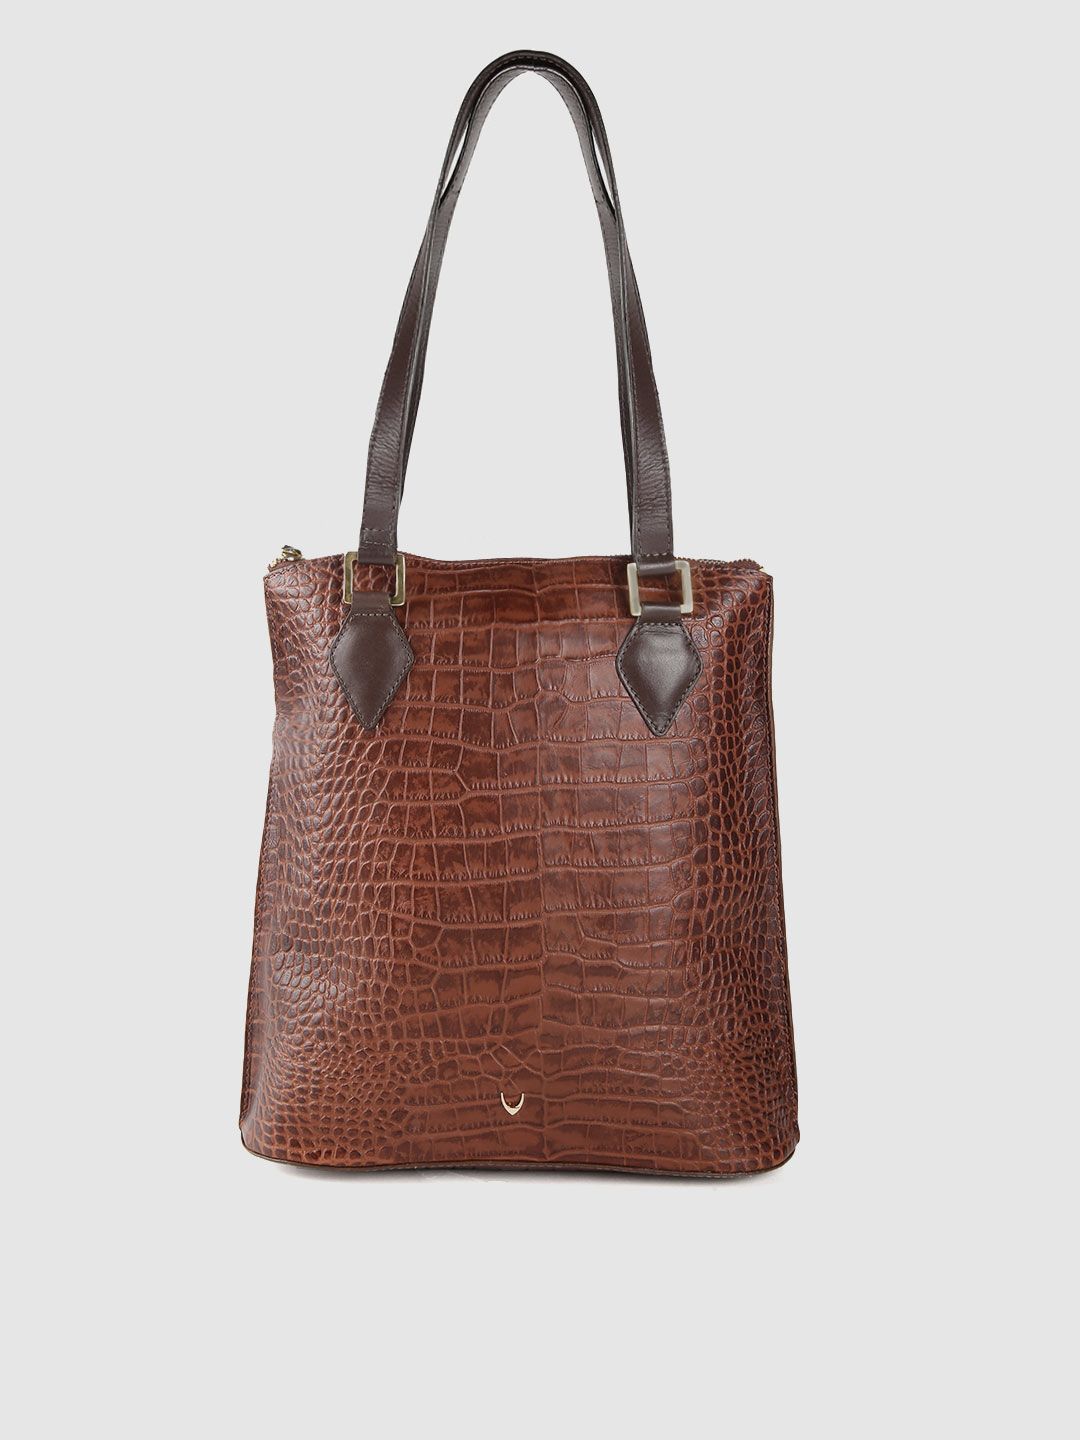 Hidesign Tan Textured Leather Shoulder Bag Price in India